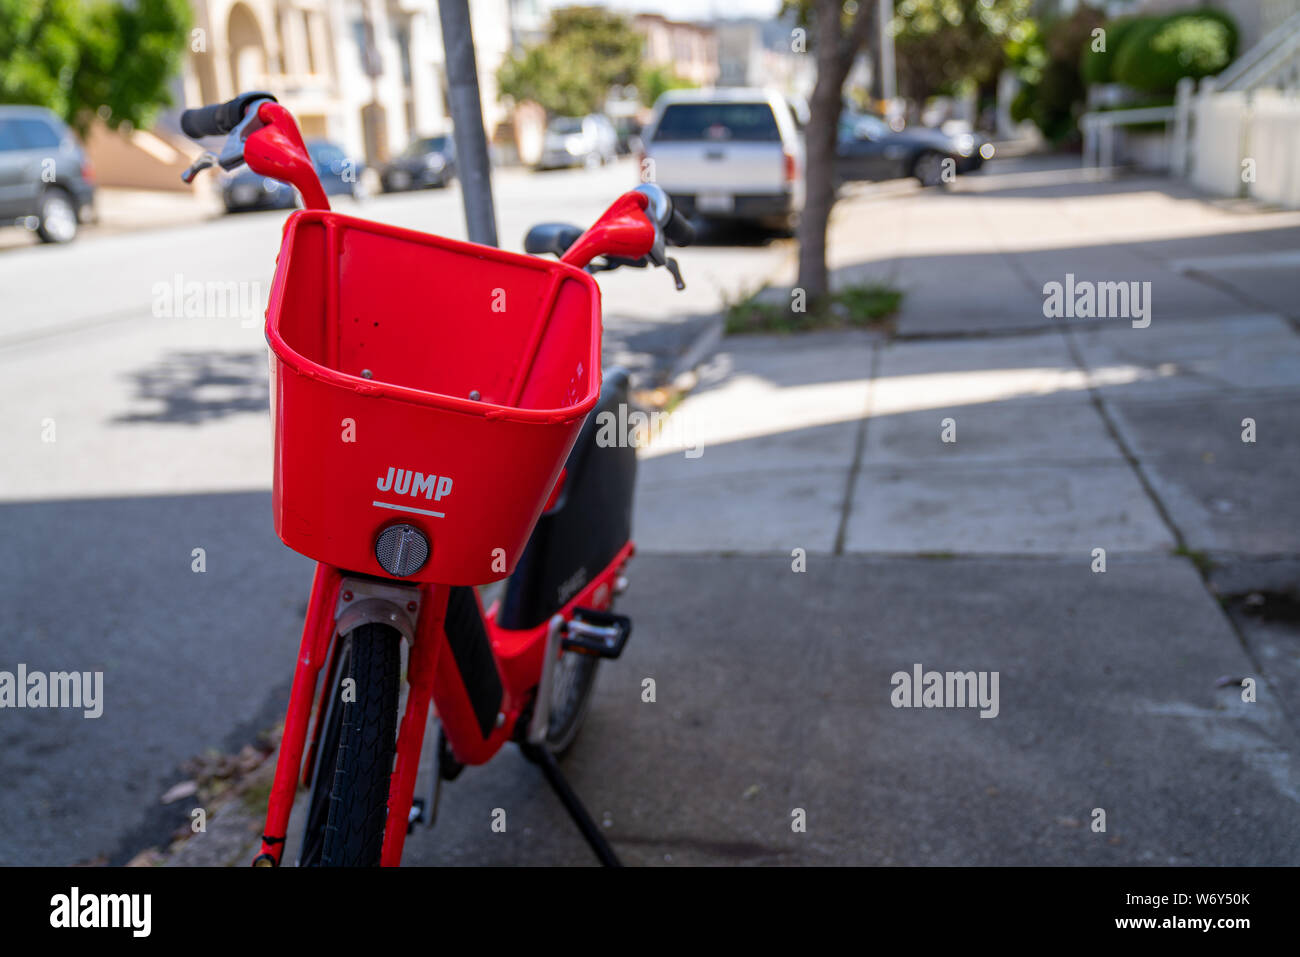 Red JUMP on-demand electric bicycle, company owned by Uber, parked on residential street Stock Photo